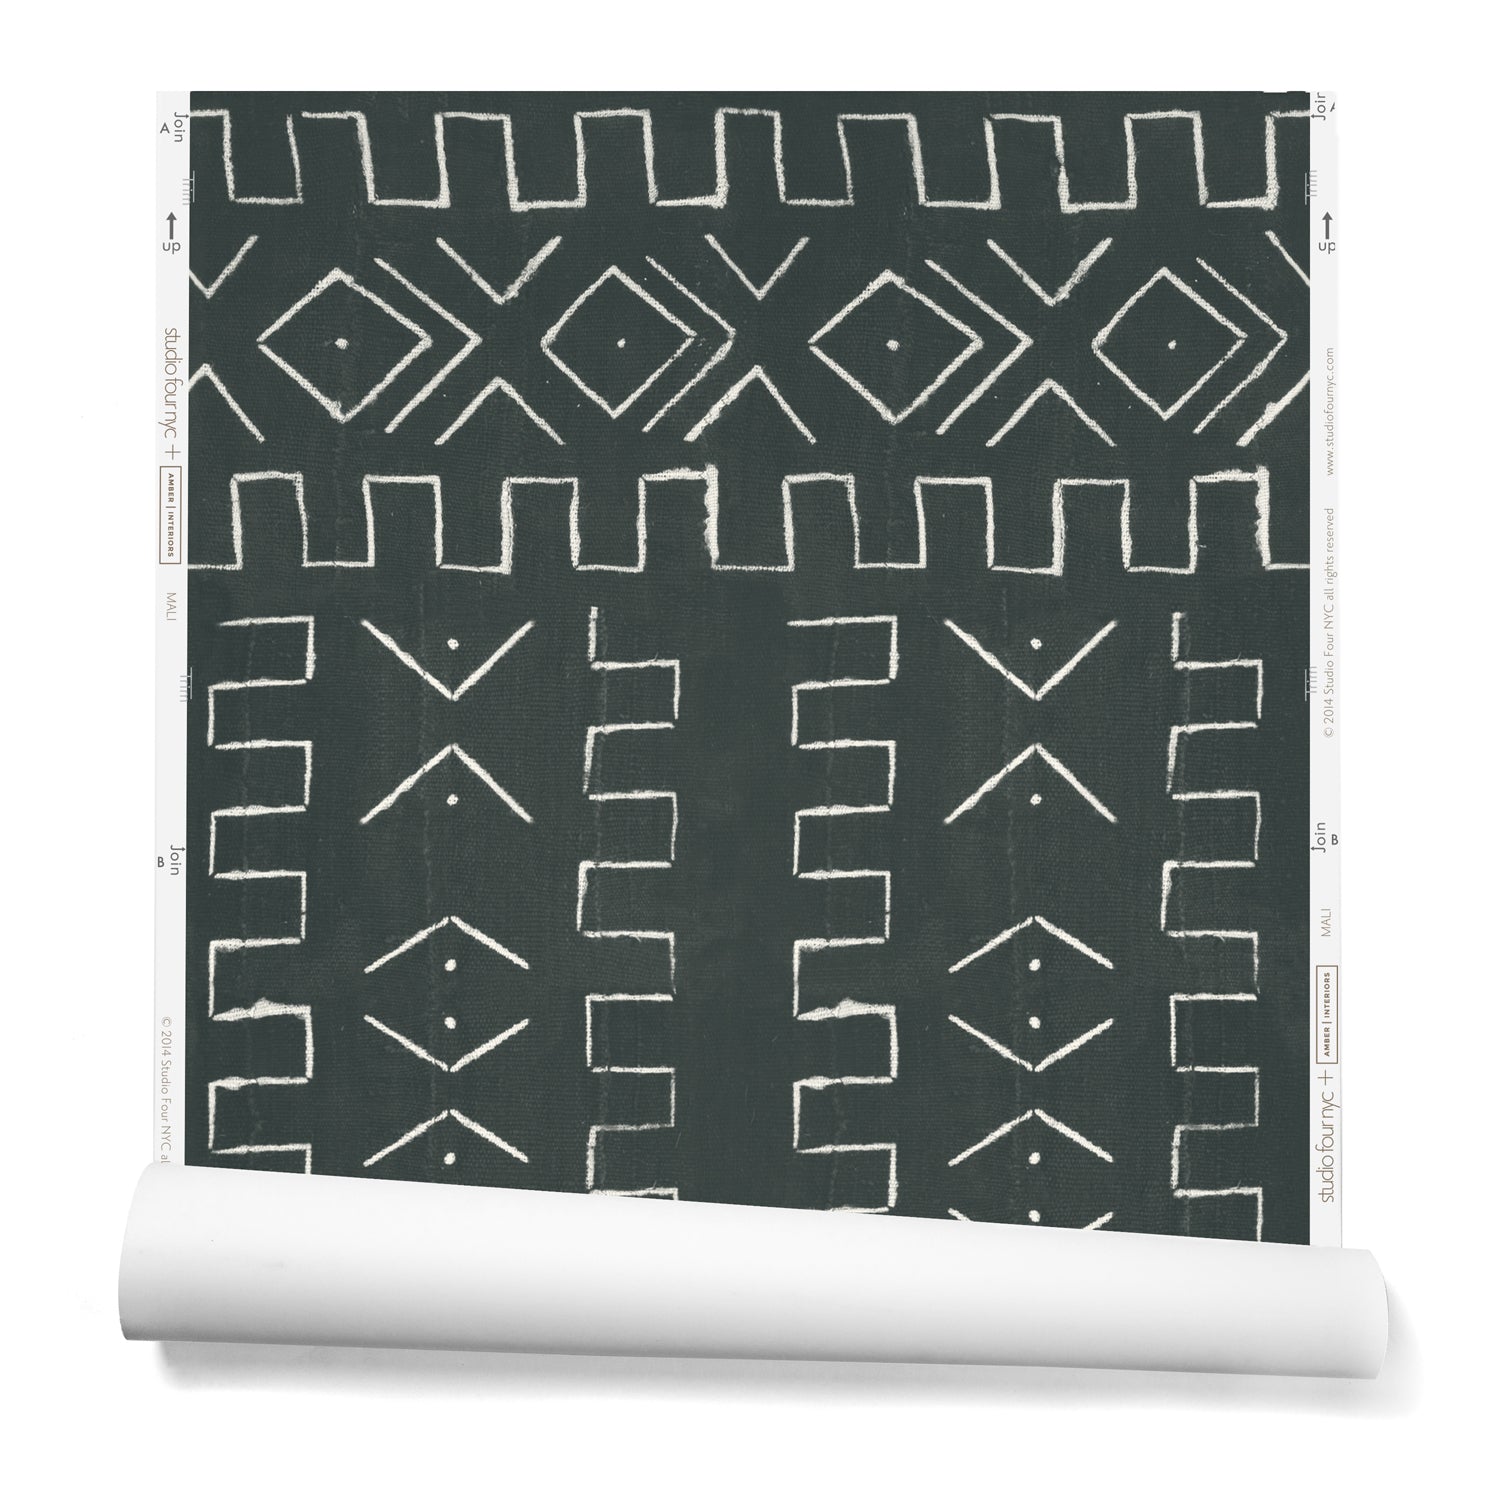 A partially unrolled roll of wallpaper in a minimalist African-inspired line design of painted white on a charcoal background.